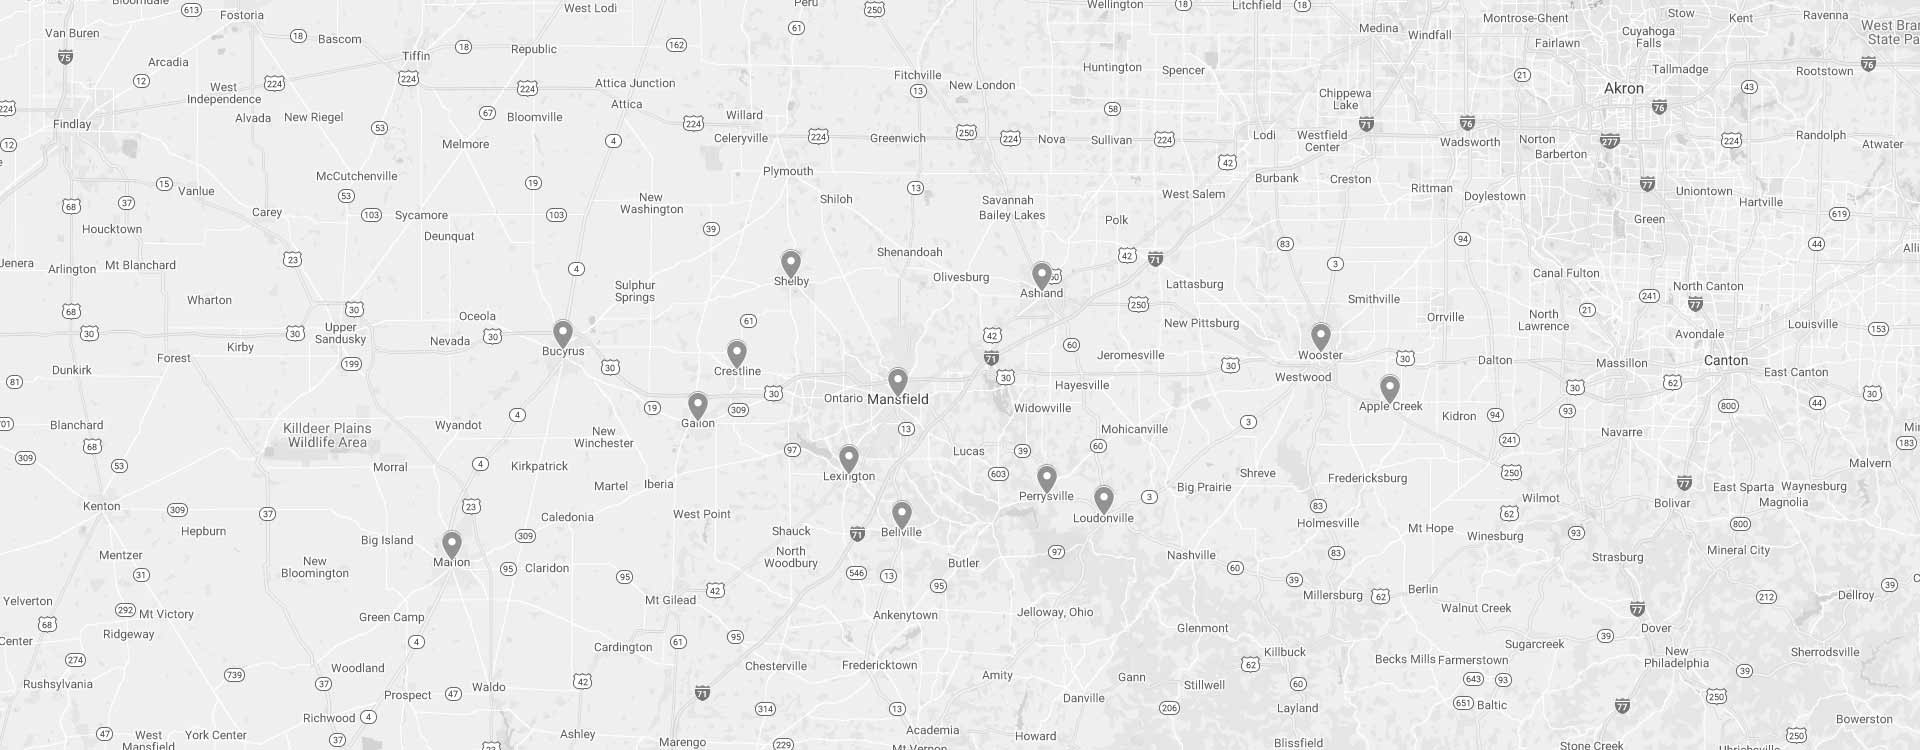 Ohio Green Lawn & Pest lawn care service areas map background